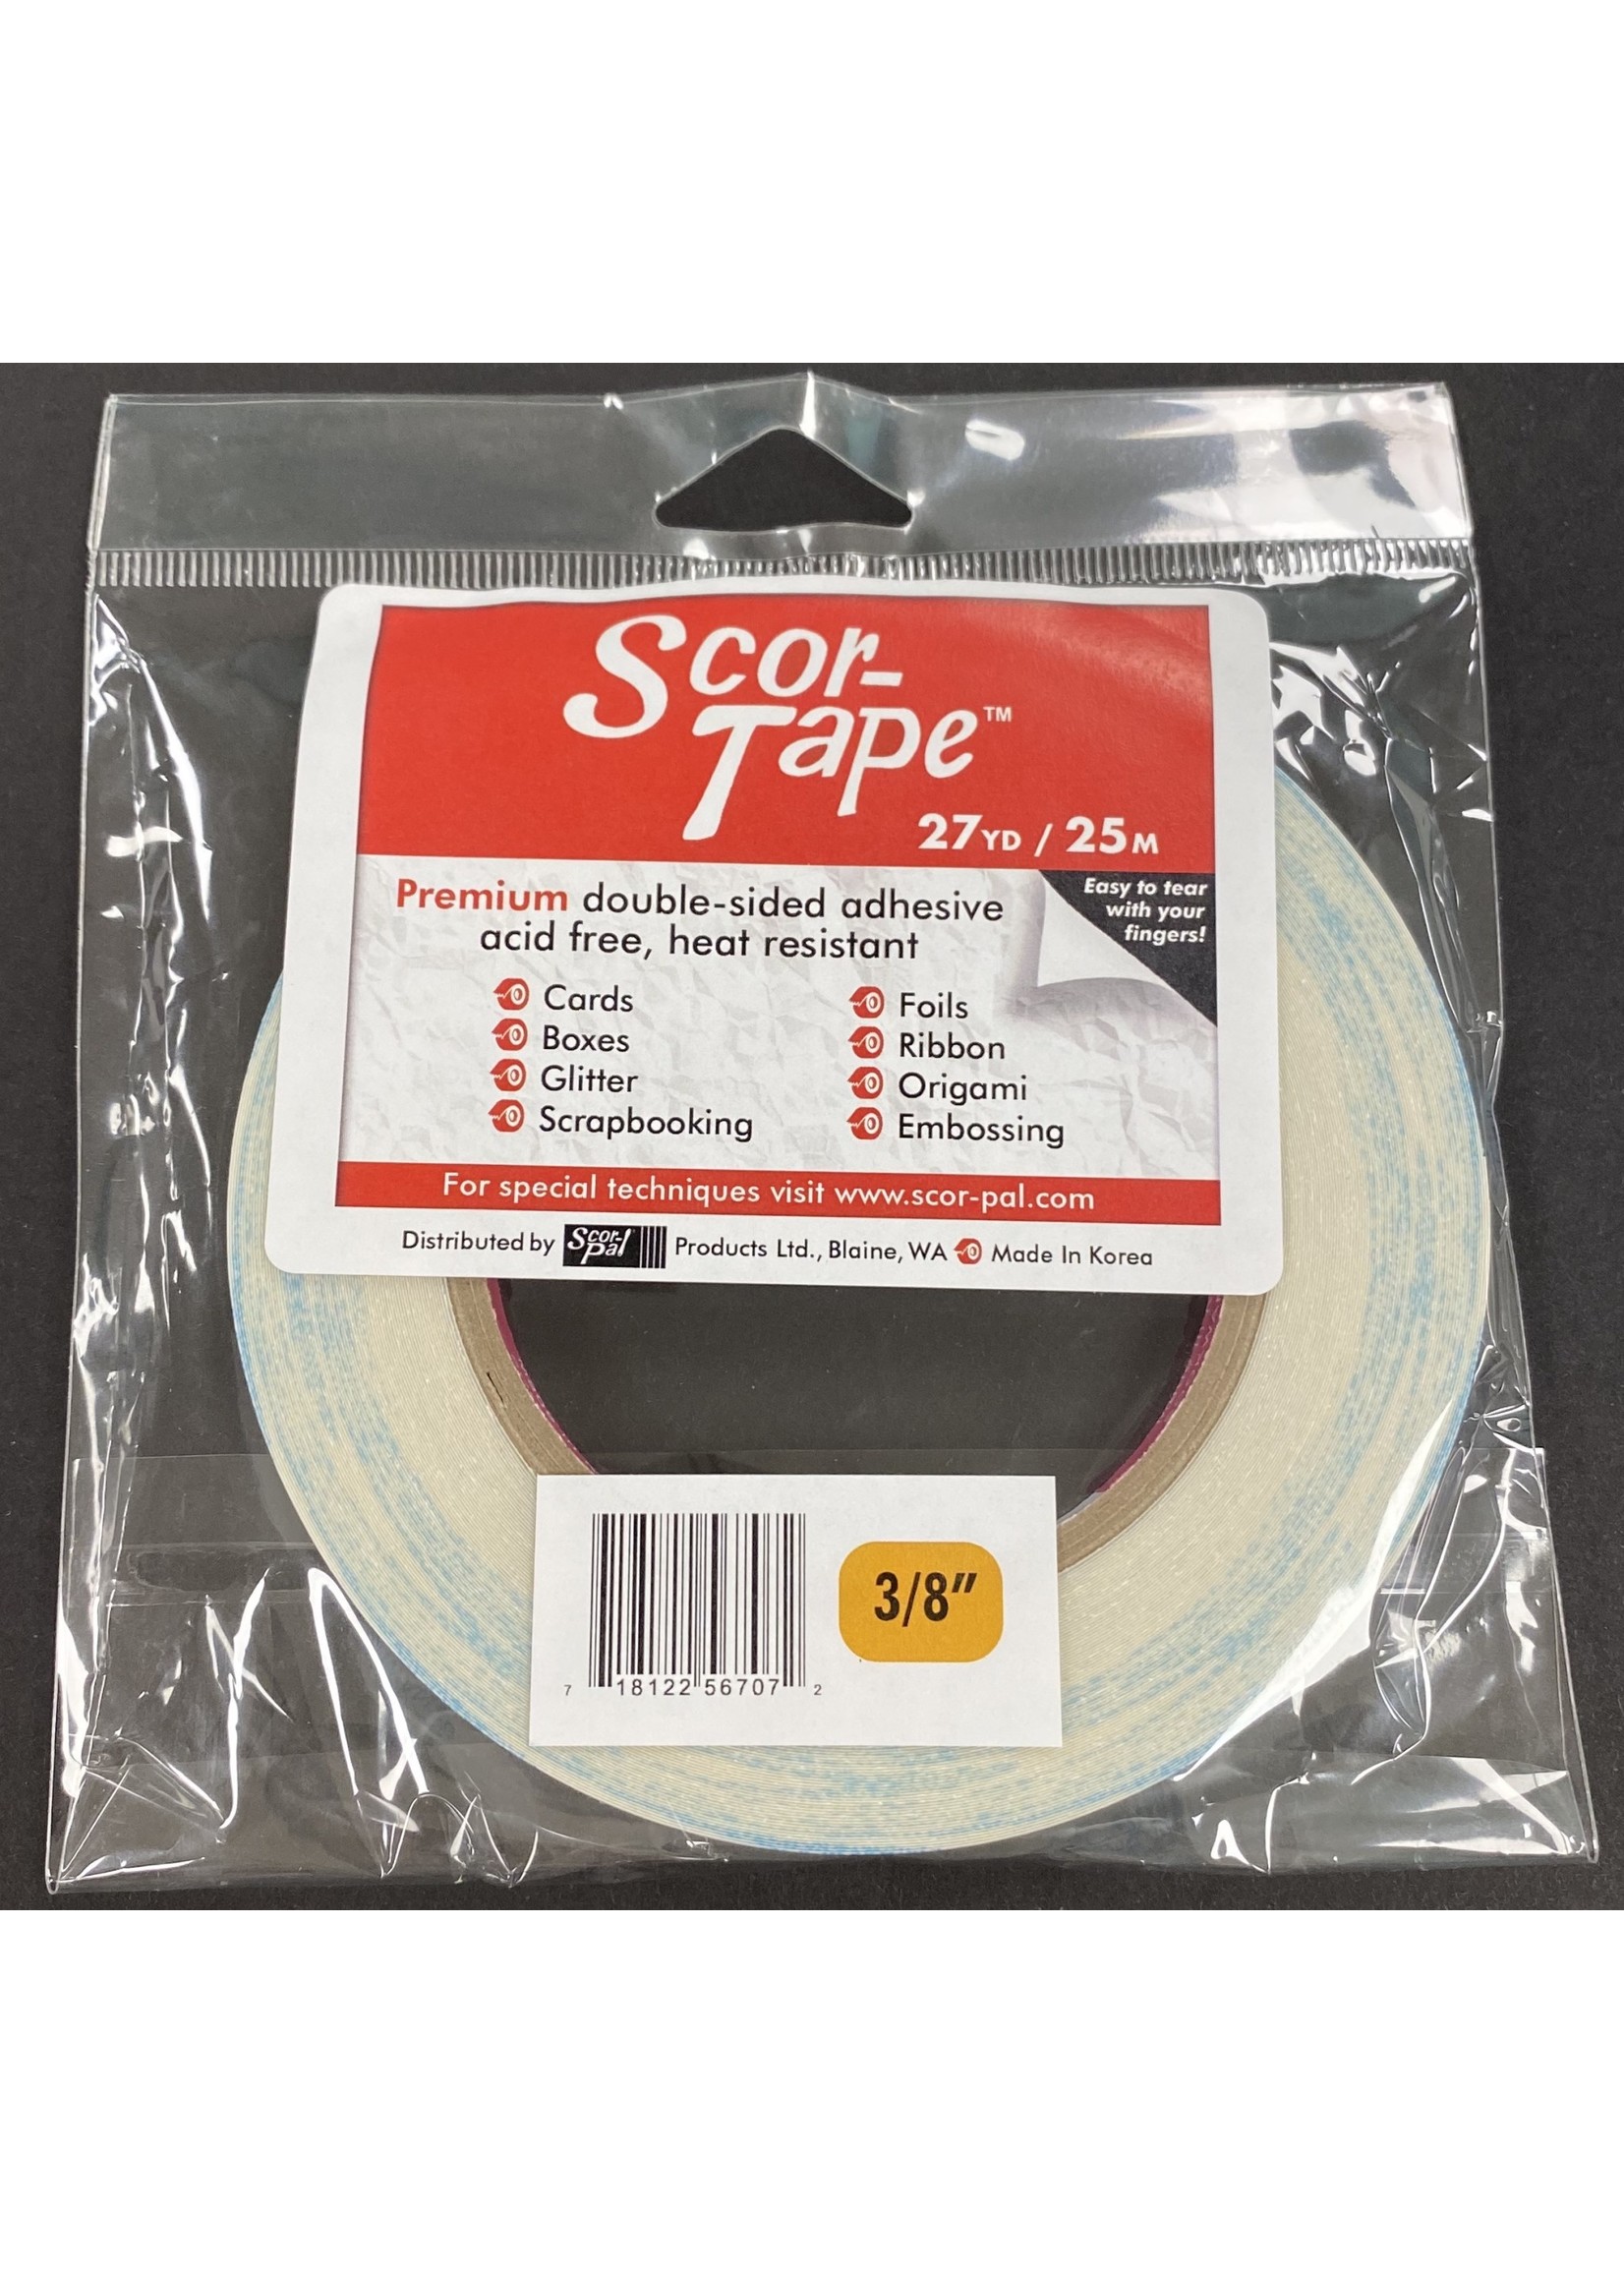 How To Use Scor-Tape By Scor-Pal 